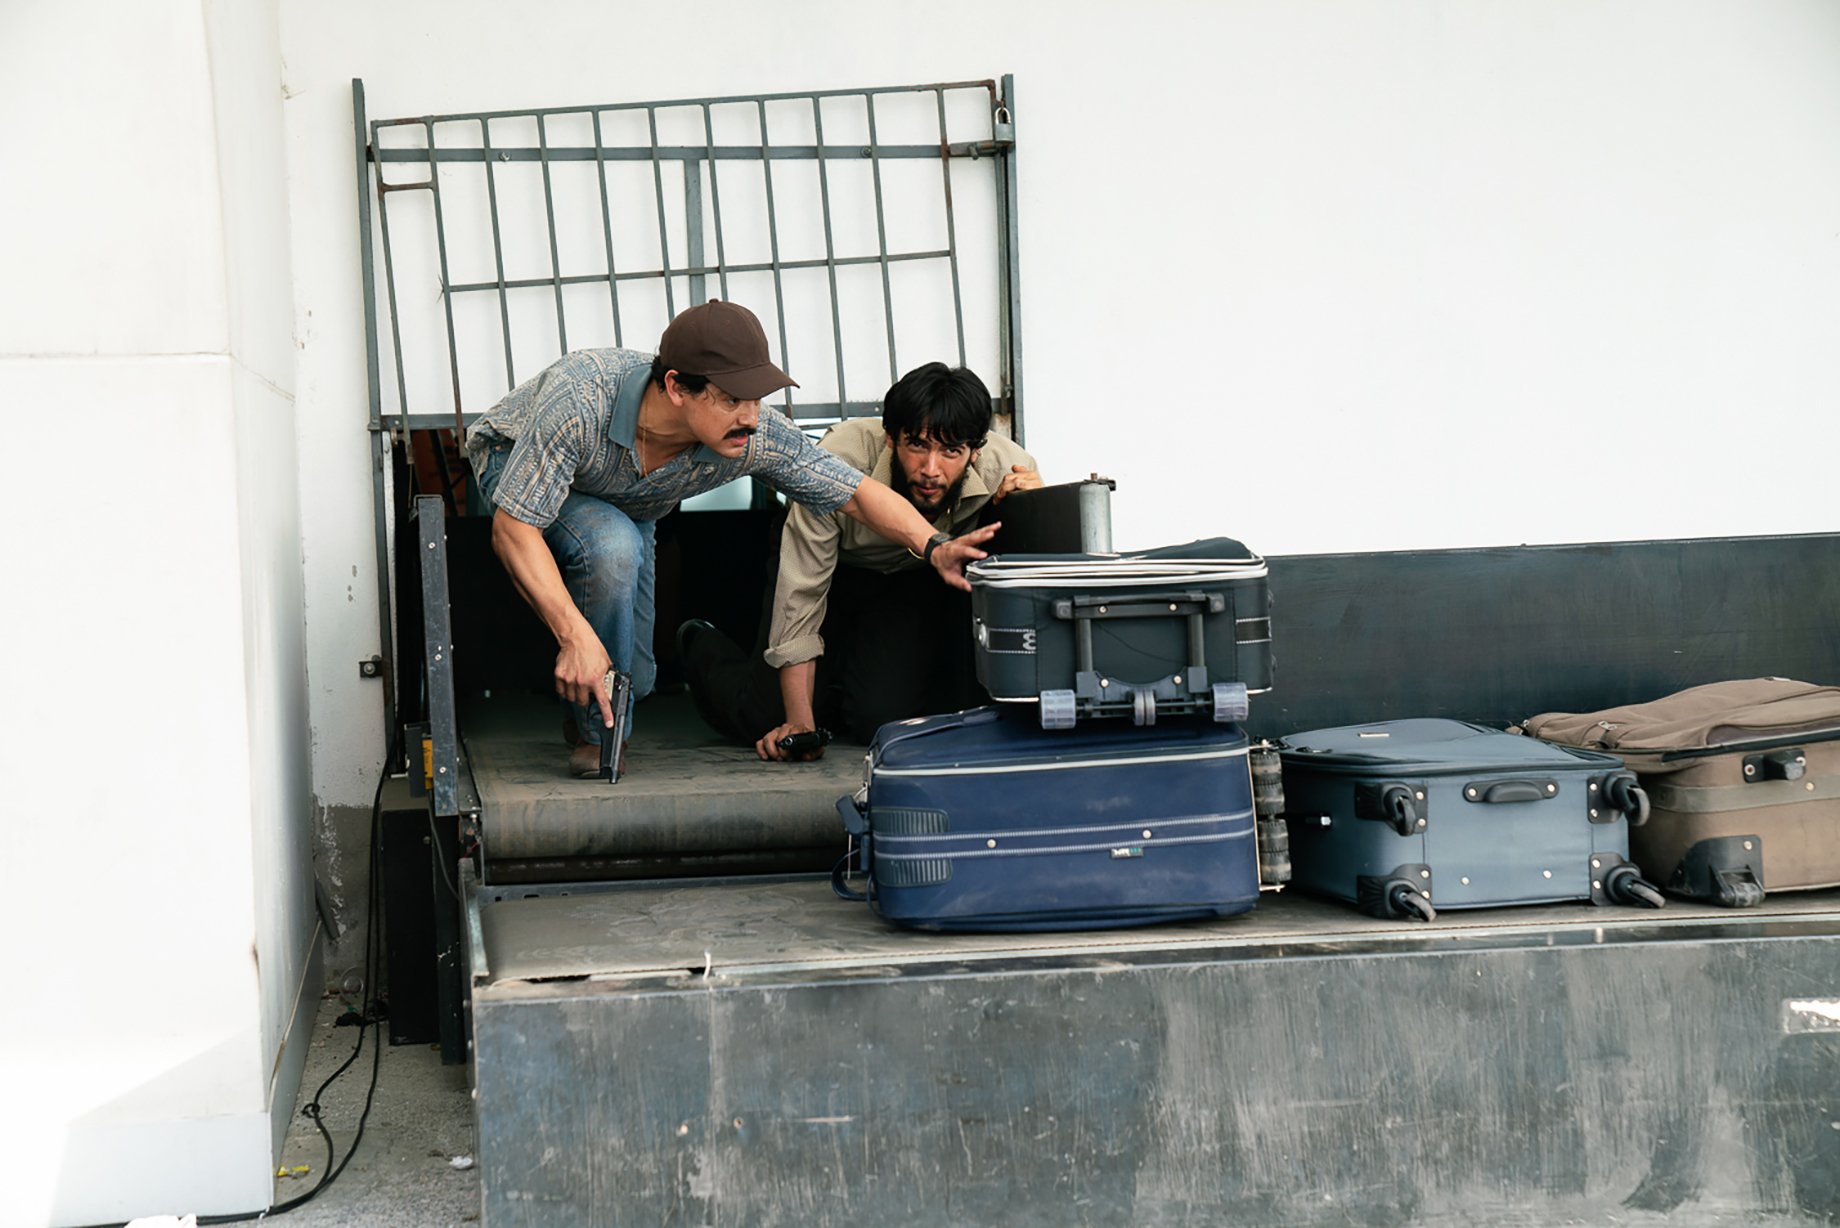 Two men climb through baggage claim at airport for Narcos: Mexico season 3 shot by Nicole Franco for Netflix